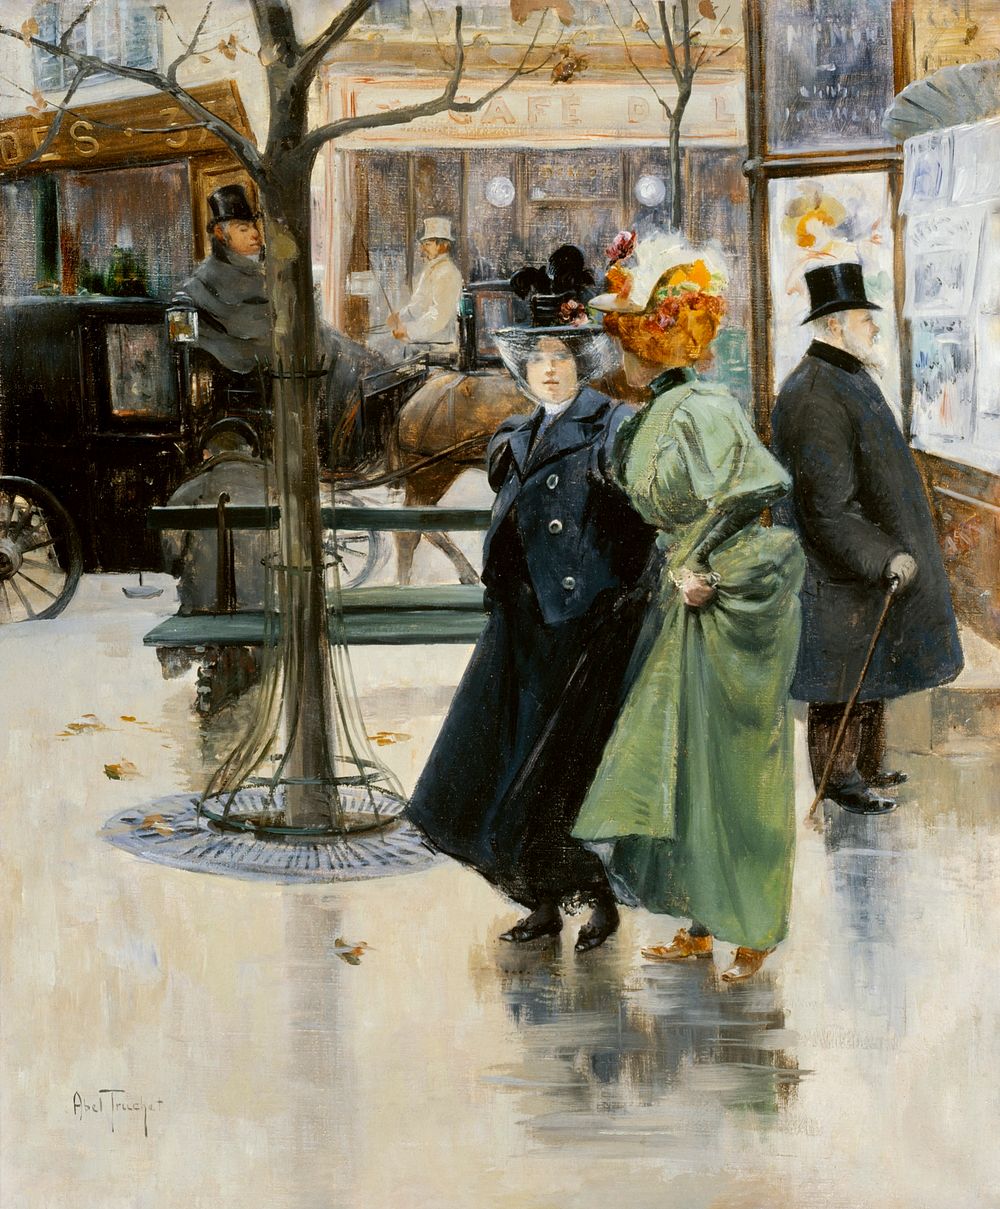 On the Boulevards (1895) by Louis Abel-Truchet. The City of Paris' Museums. Digitally enhanced by rawpixel.